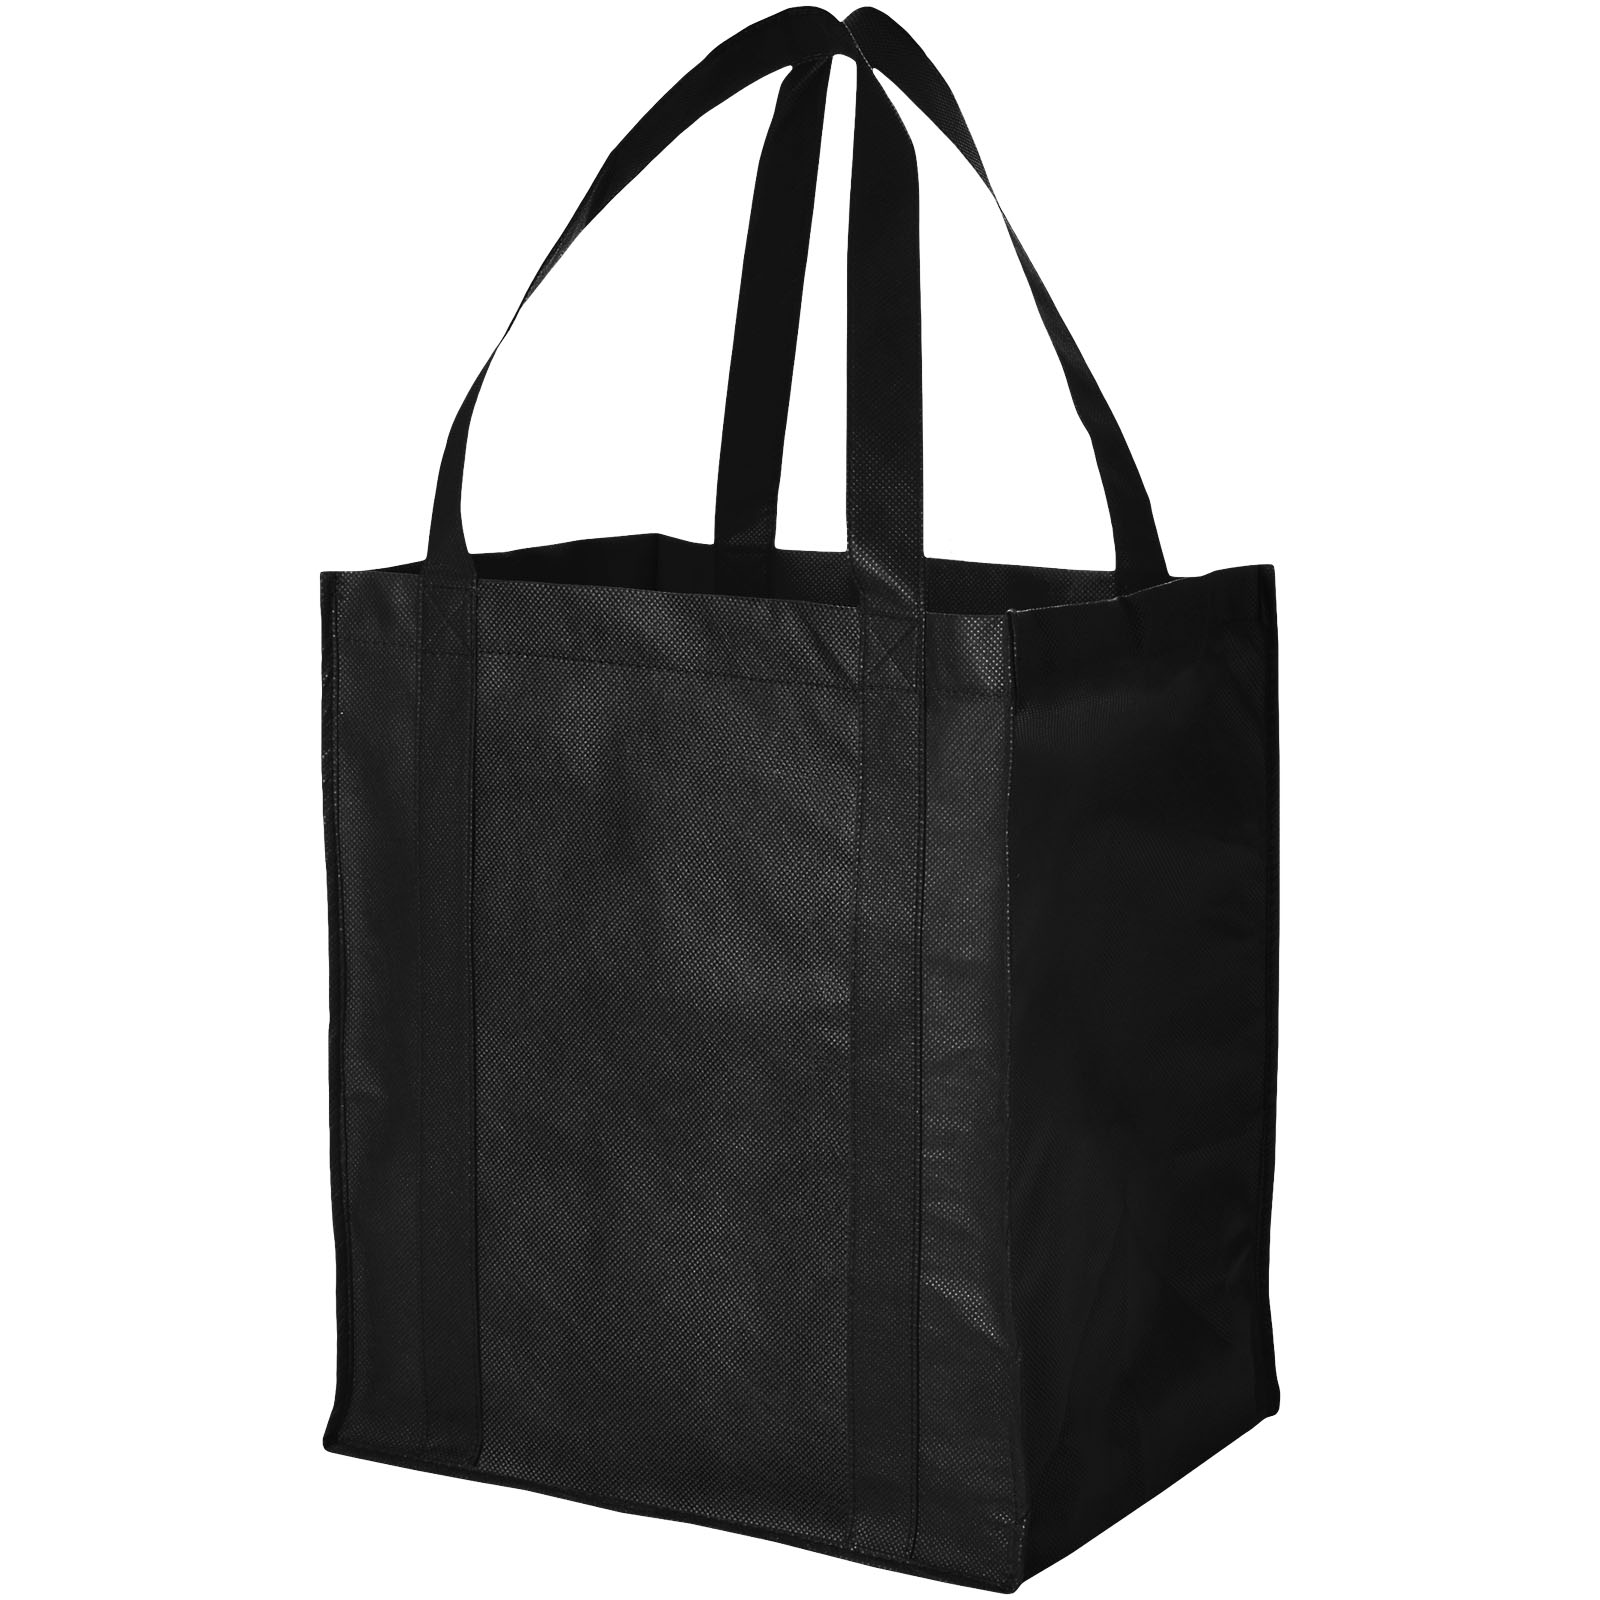 Advertising Shopping & Tote Bags - Liberty bottom board non-woven tote bag 29L